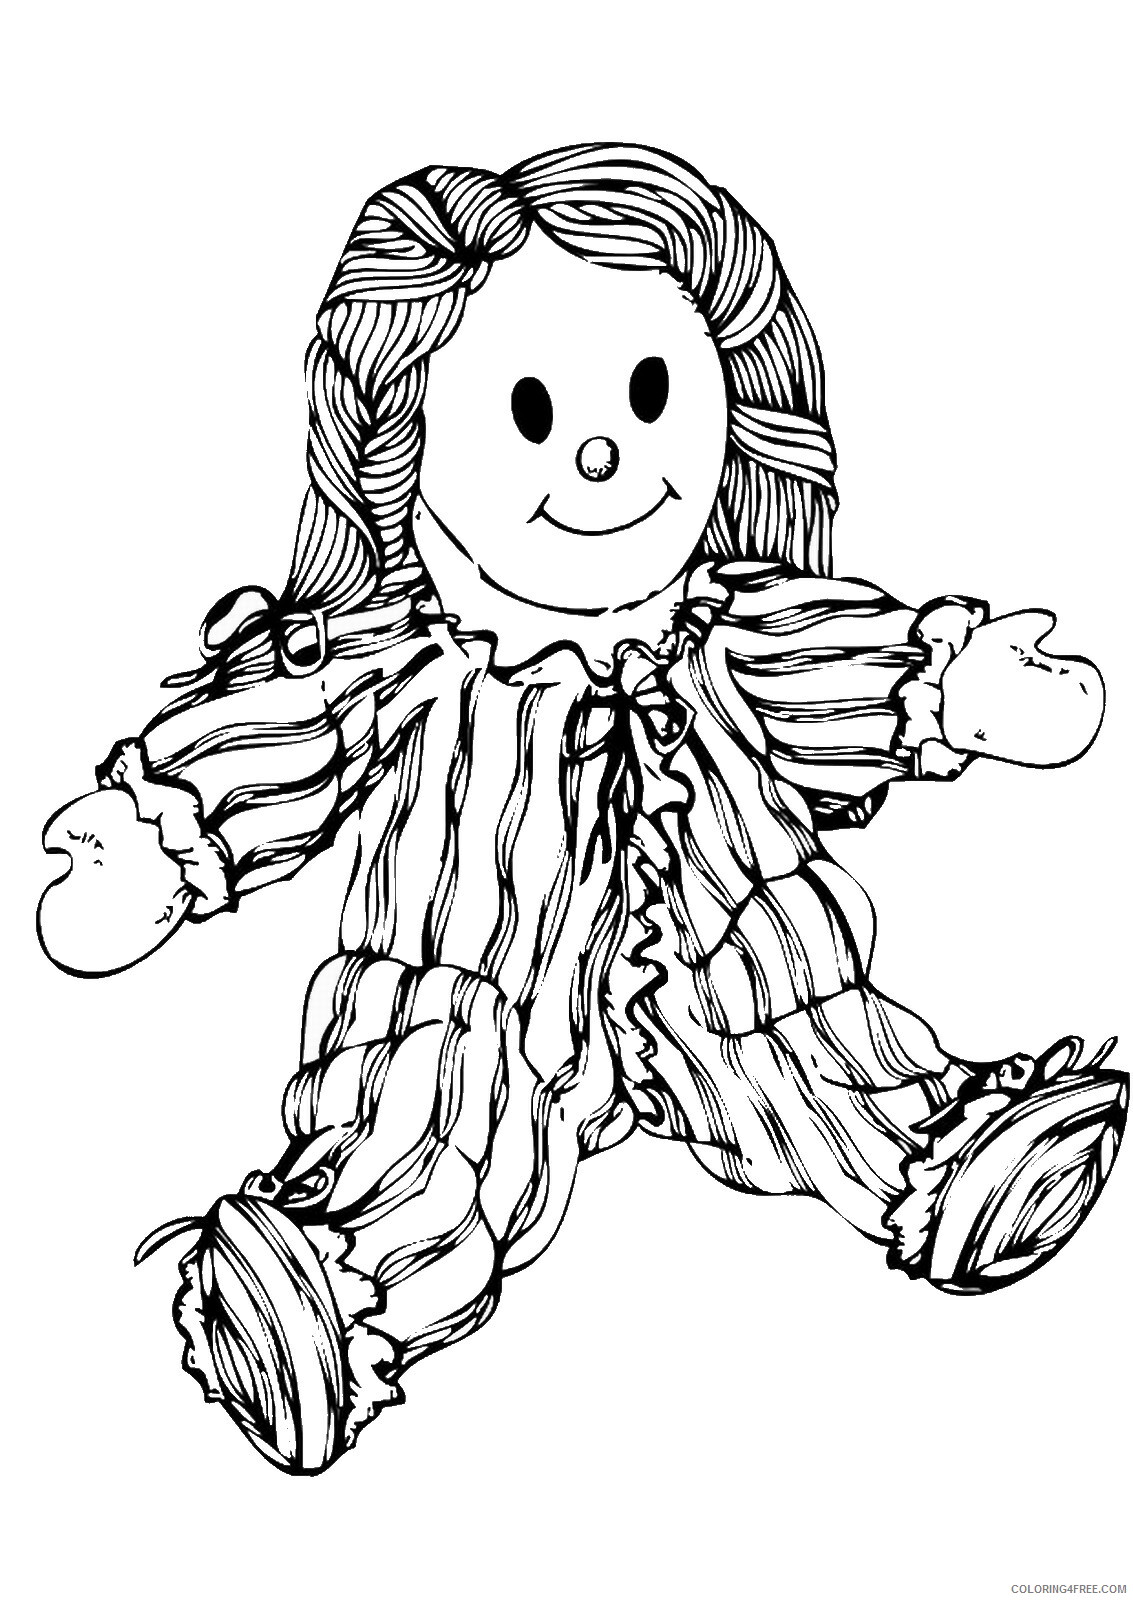 Doll Coloring Pages for Girls dolls_07 Printable 2021 0373 Coloring4free